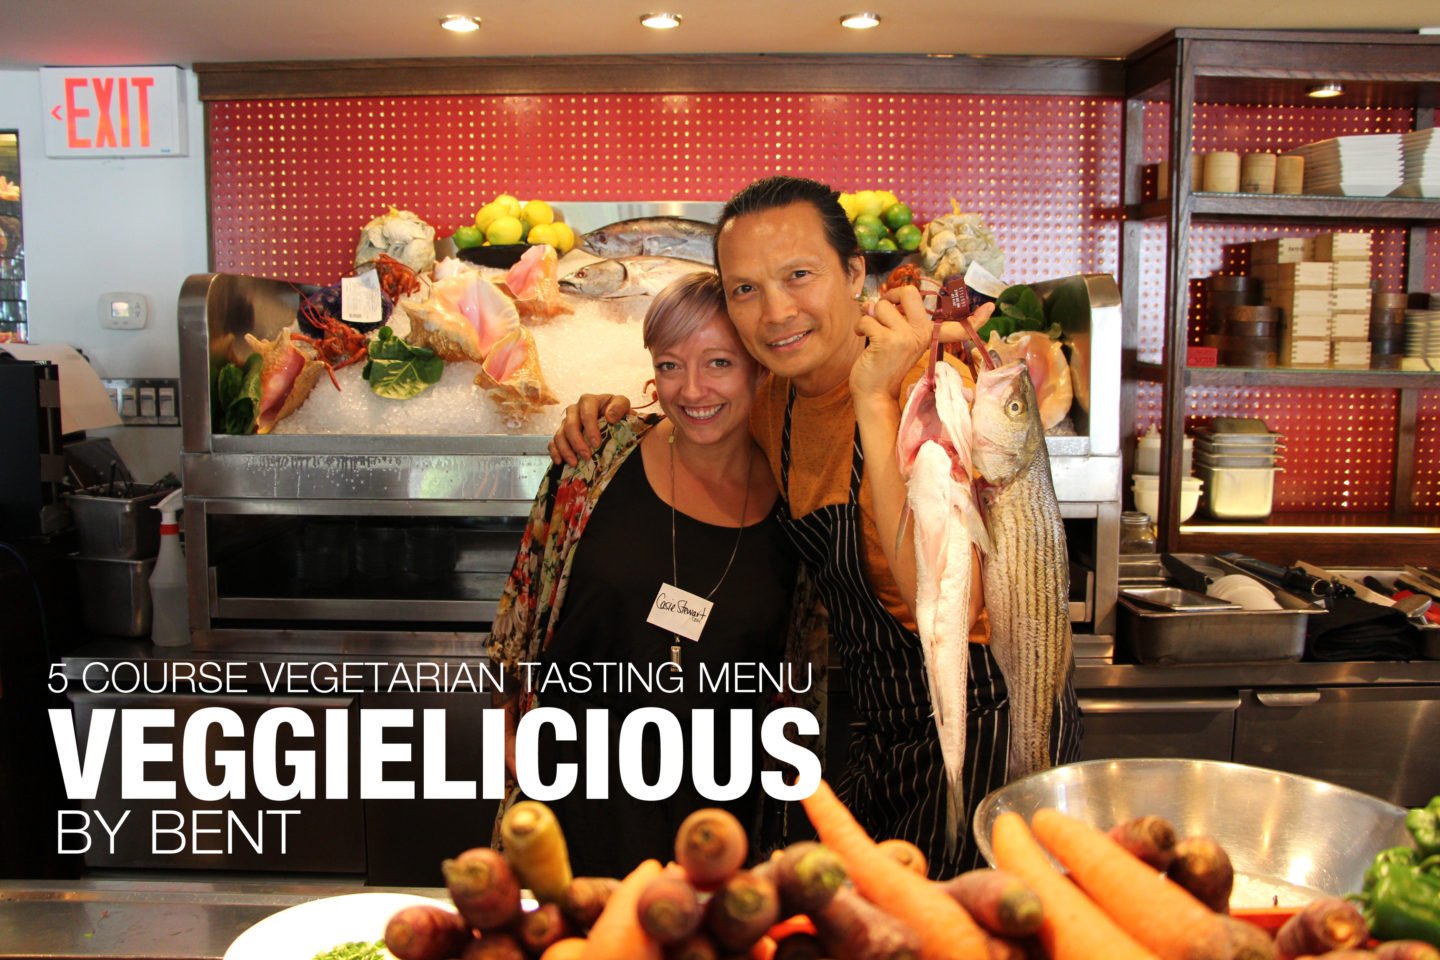 VEGGIELICIOUS by Bent Sept. 9-20th, 2014 w/ @susurlee